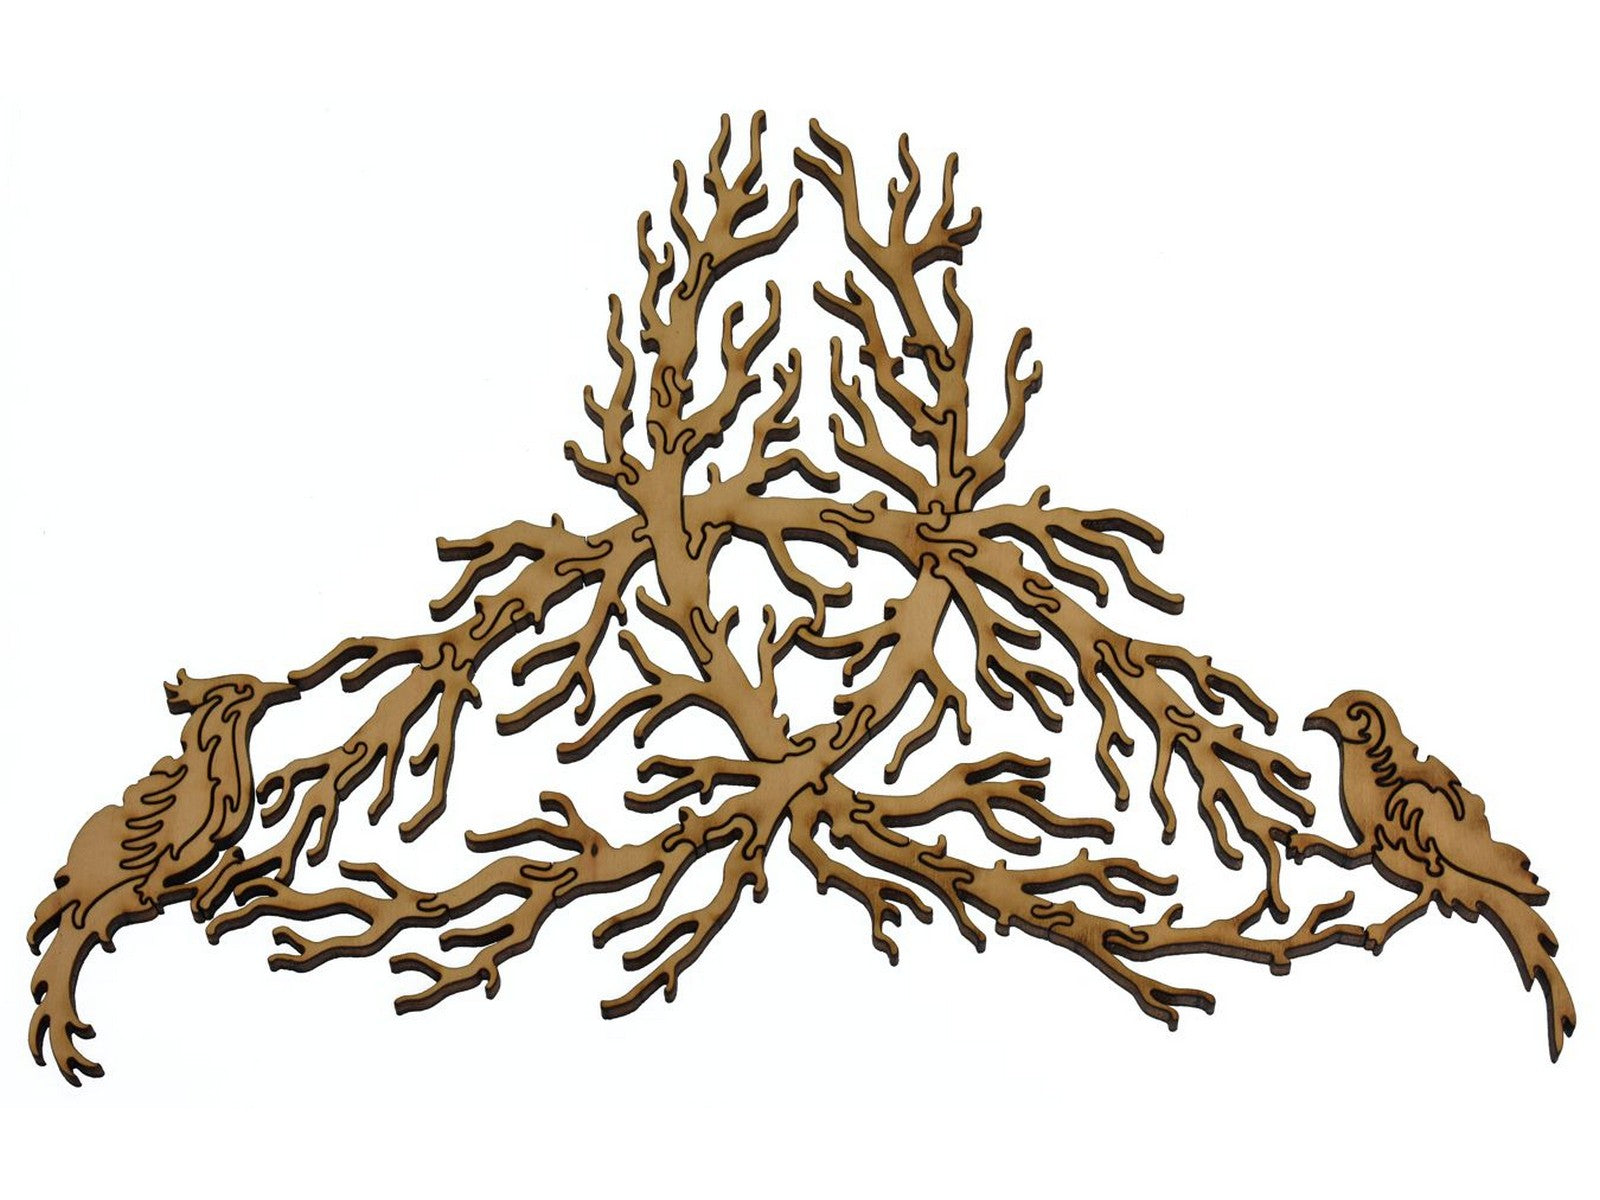 A closeup of pieces showing branches and birds.